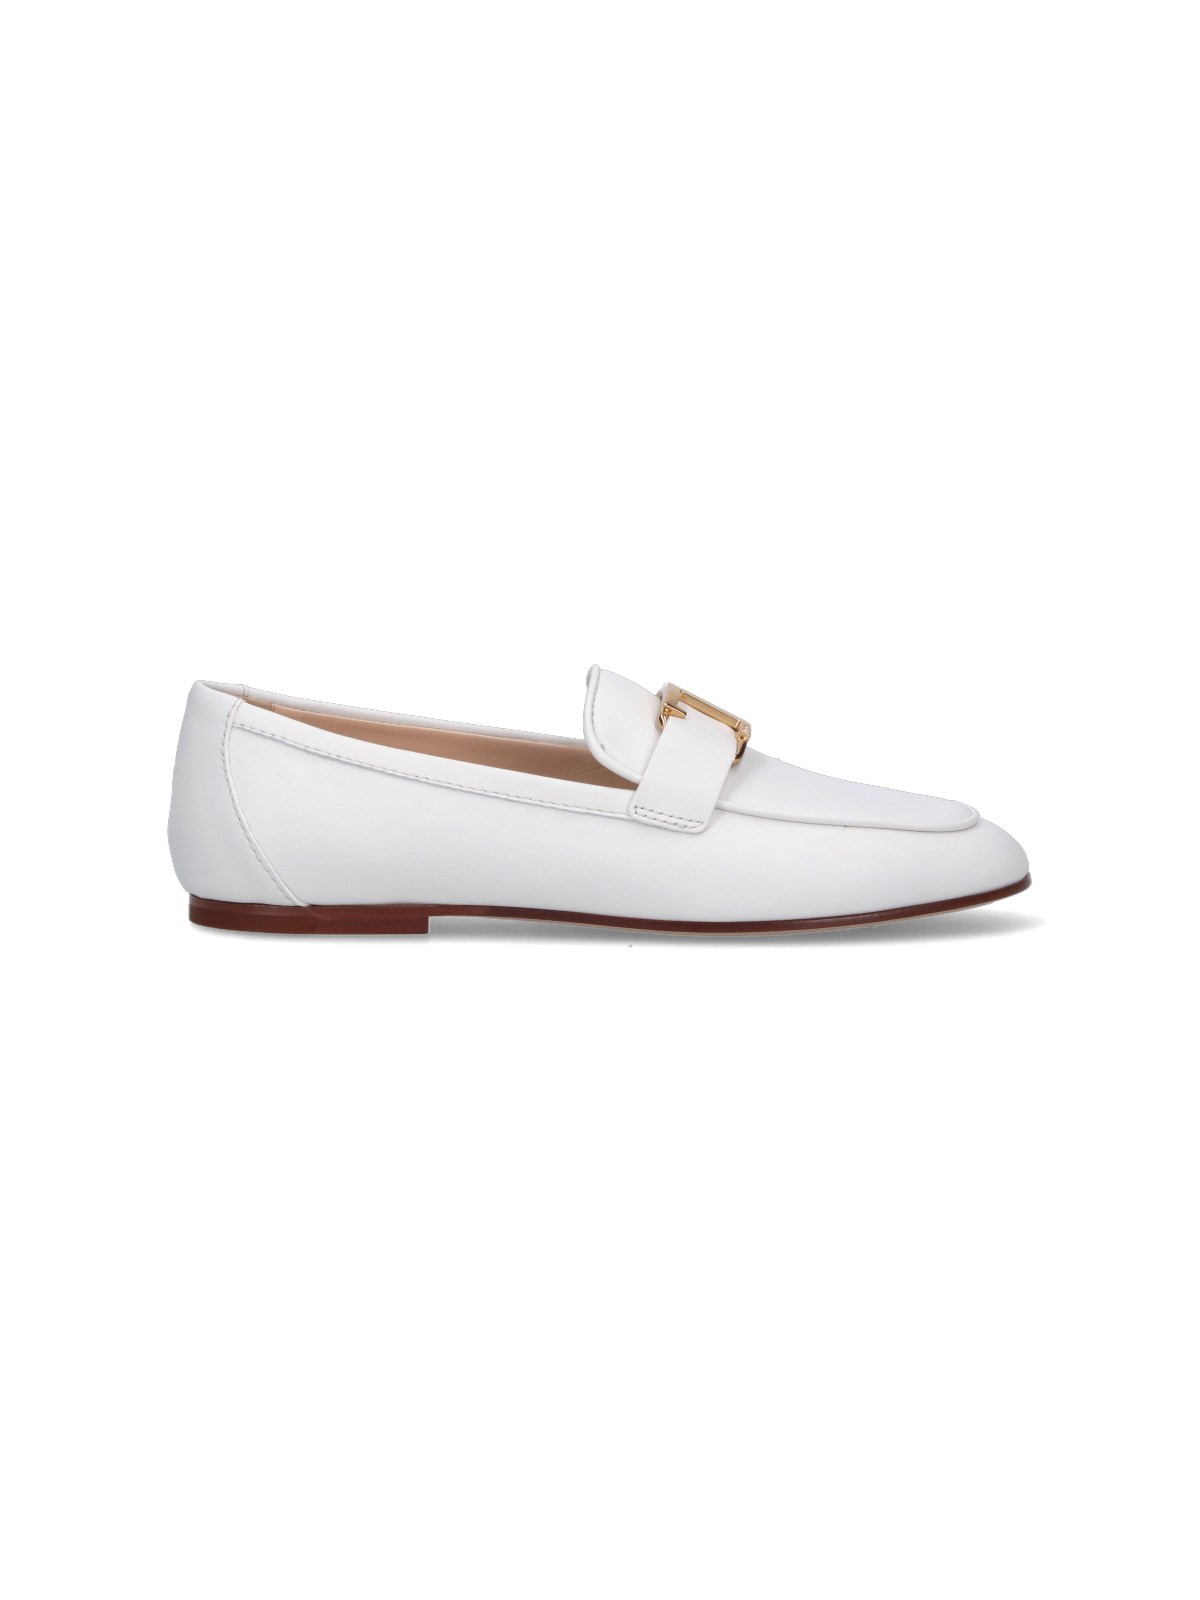 TOD'S LOAFERS "T-TIMELESS"